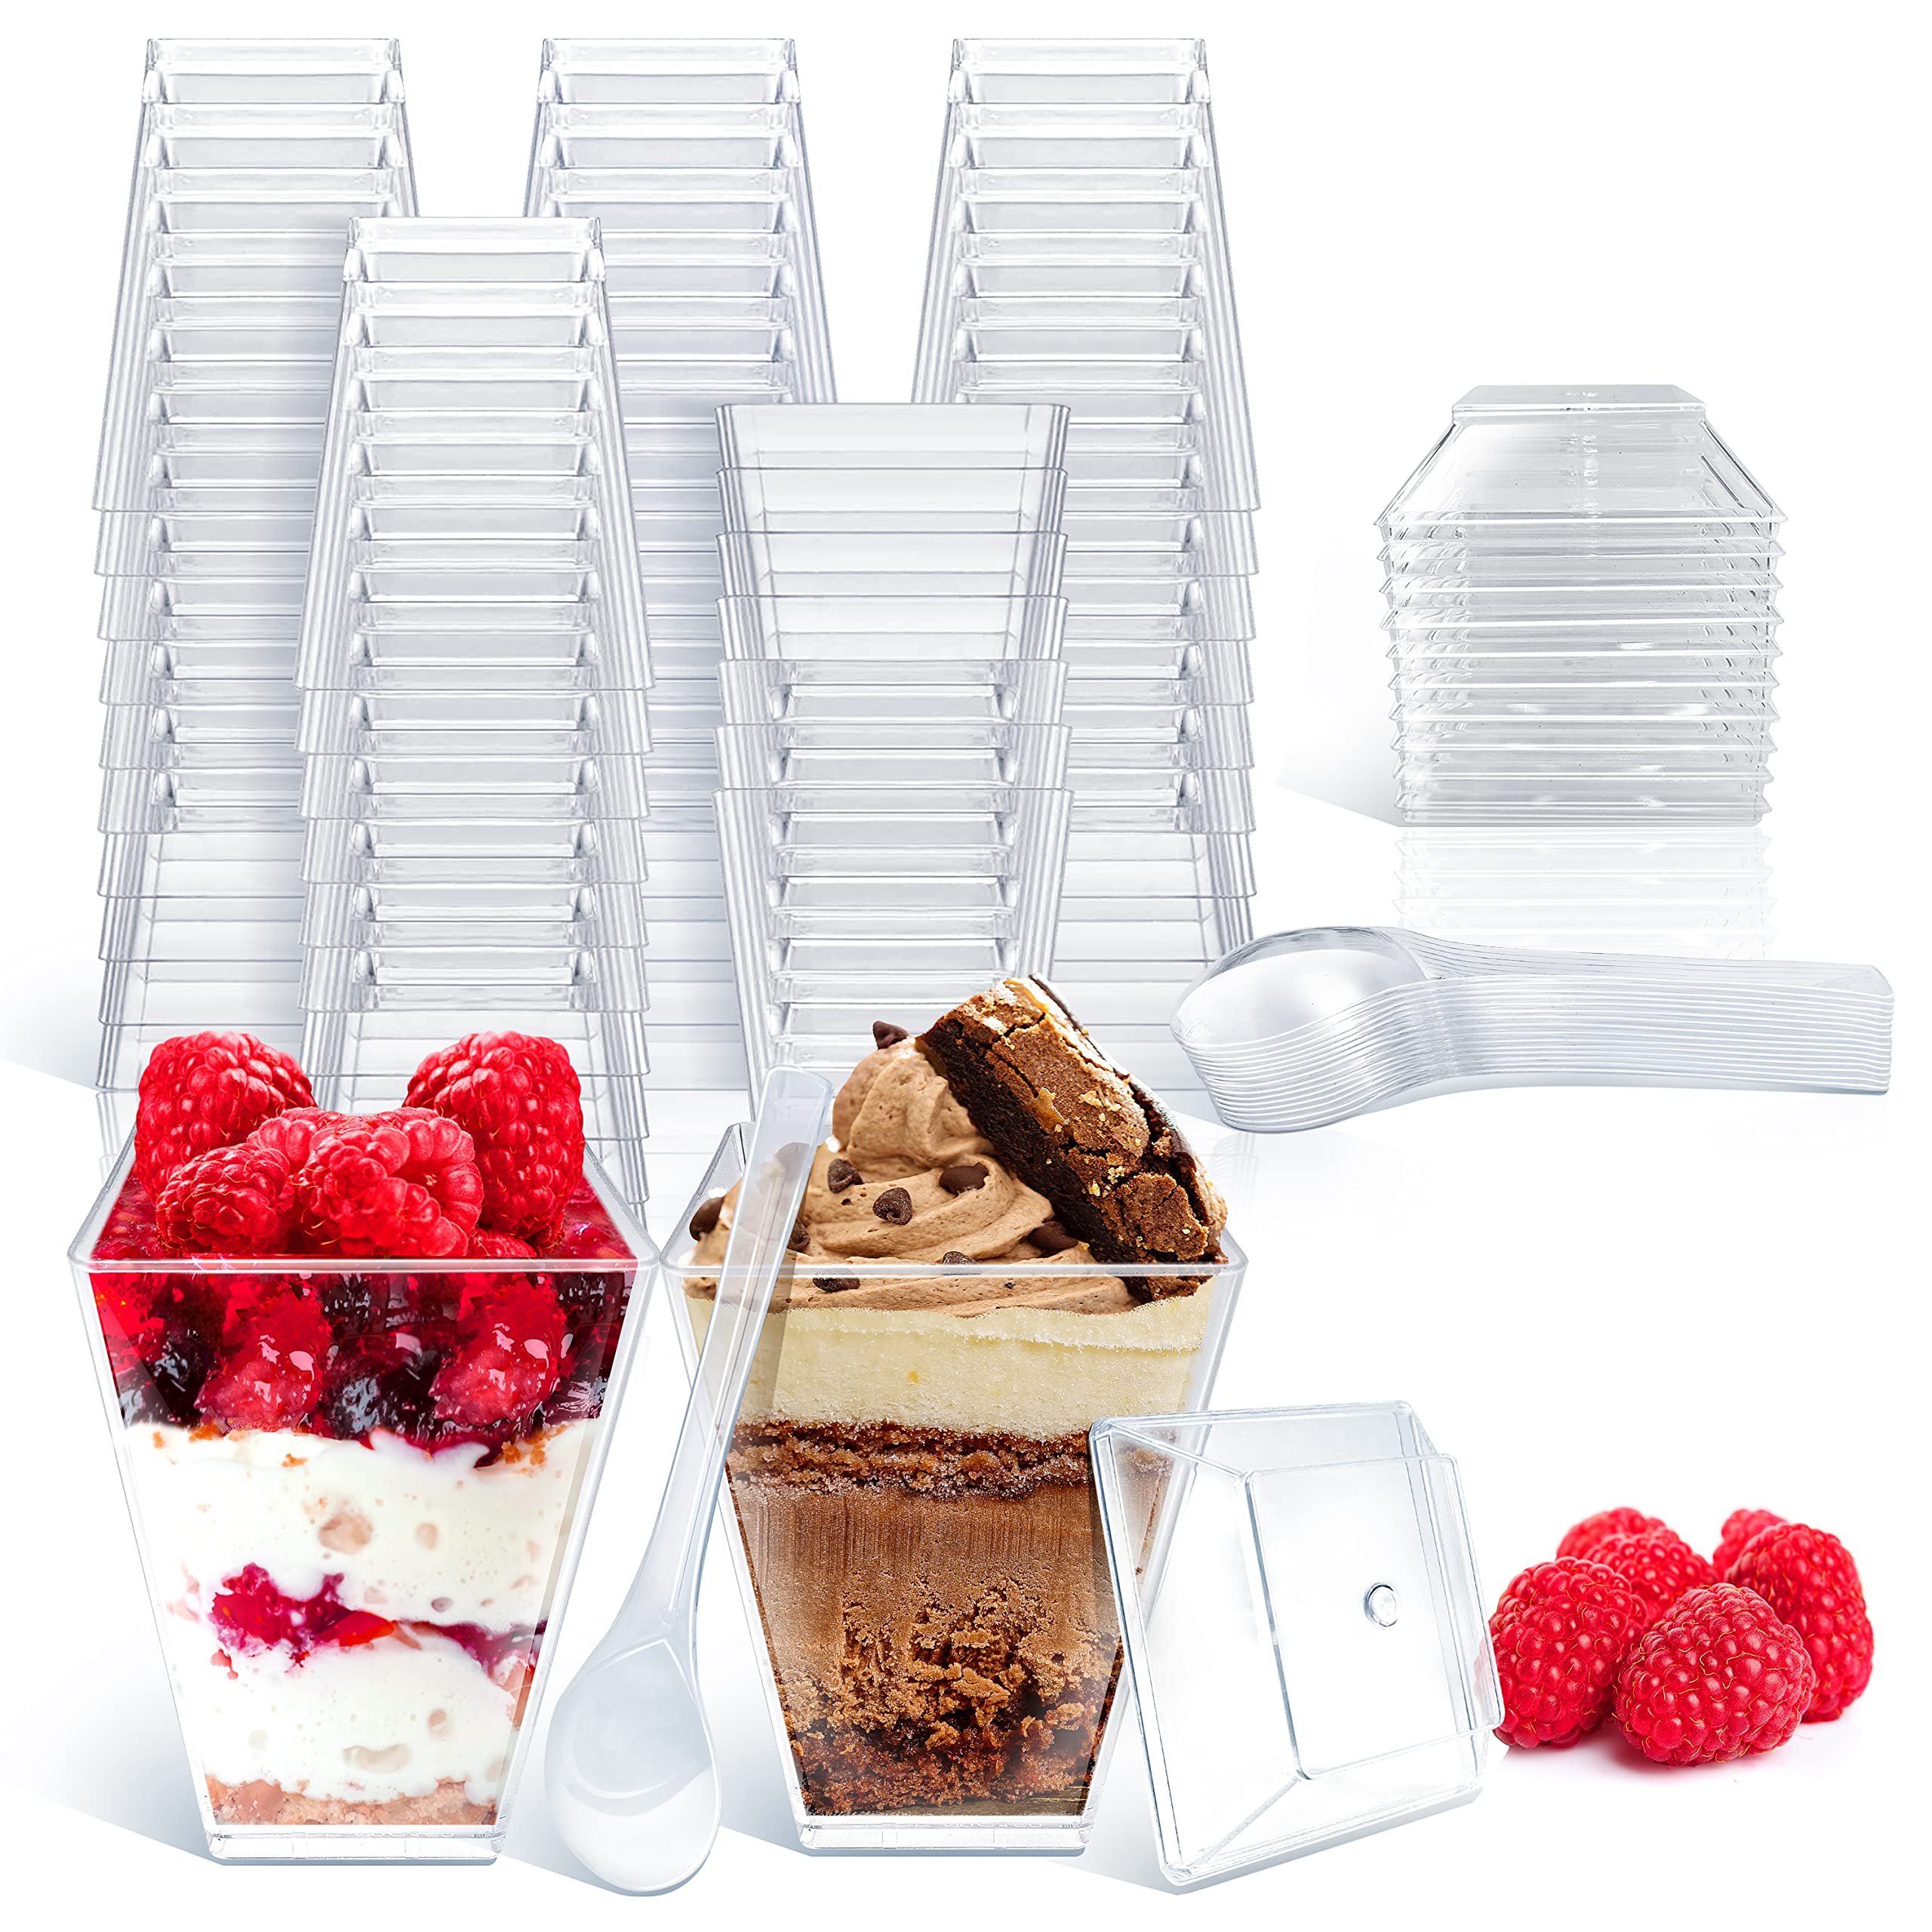 Lex Store 50 Pack 5 oz Plastic Dessert Cups with Lids and Spoons Clear Parfait Cups with Lids Mini Dessert Shooter Cups for Parties Yogurt, Fruit, Ice Cream Serve Appetizer with Vasos Para Postres